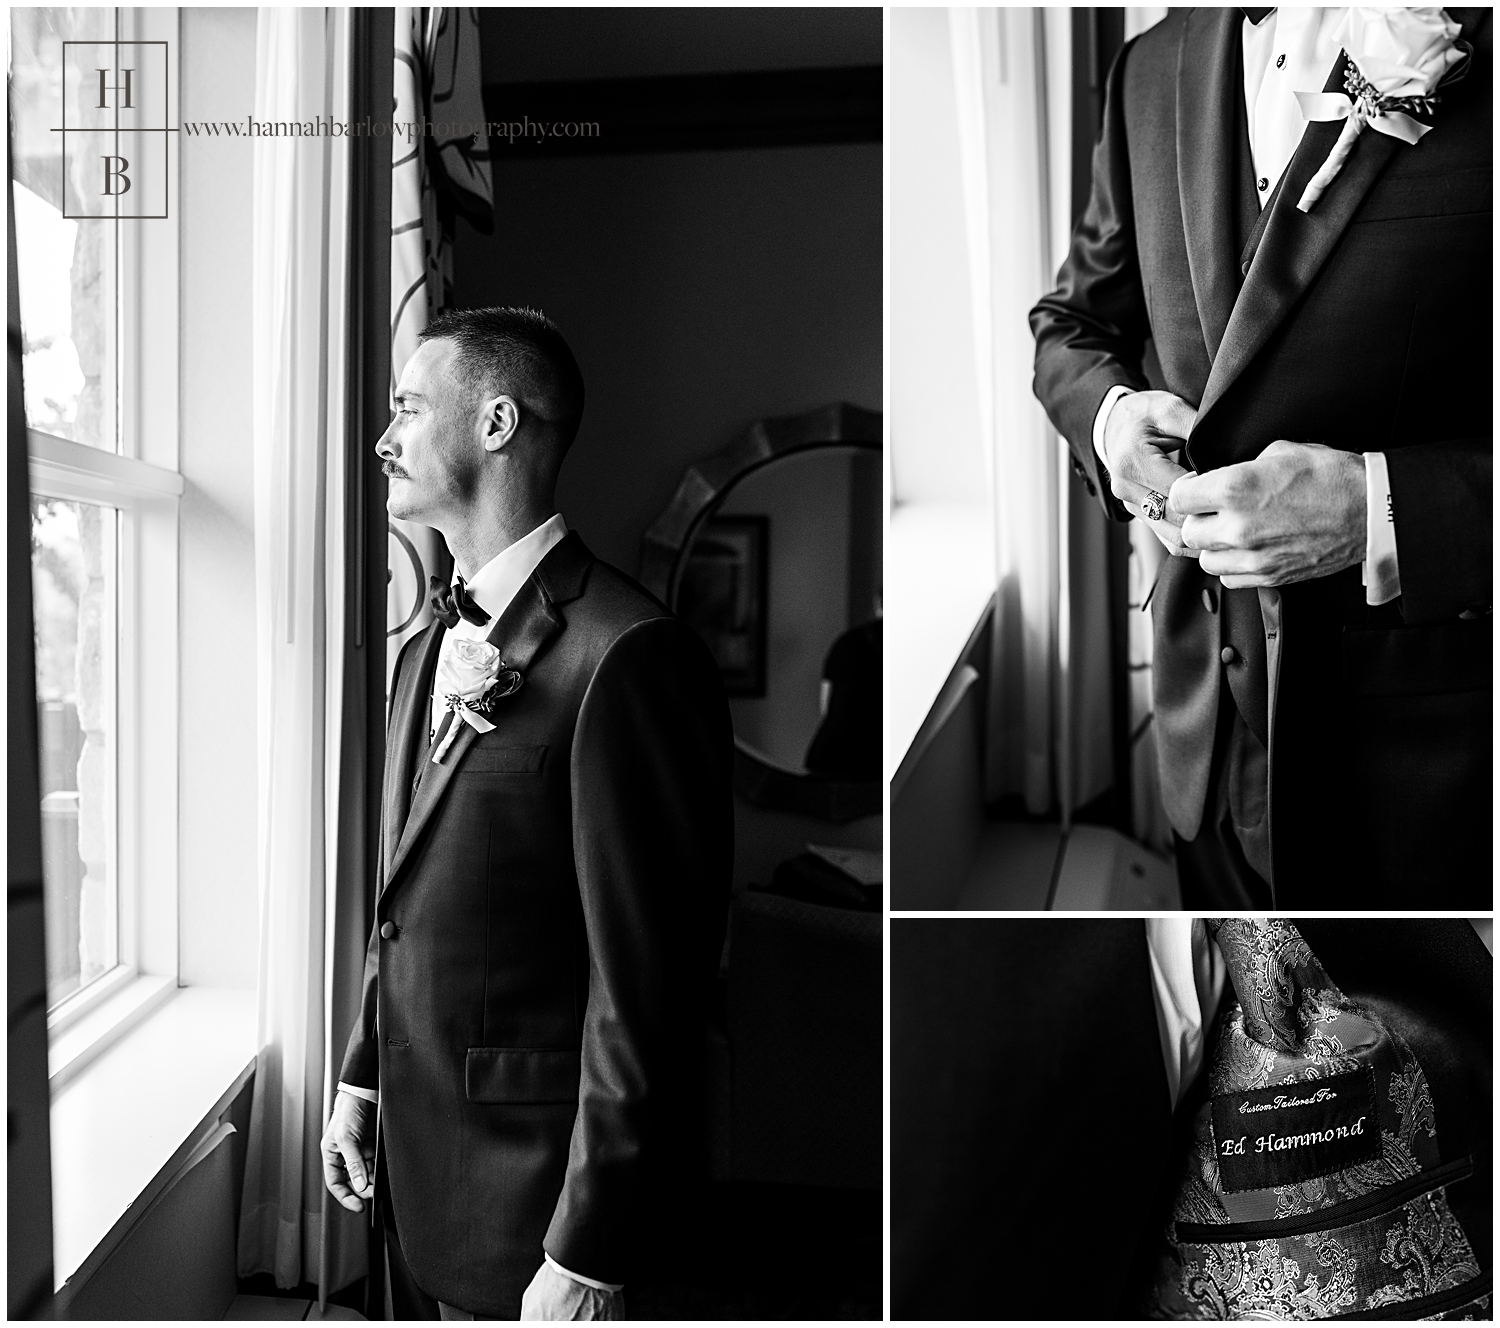 Groom stands by window and looks out